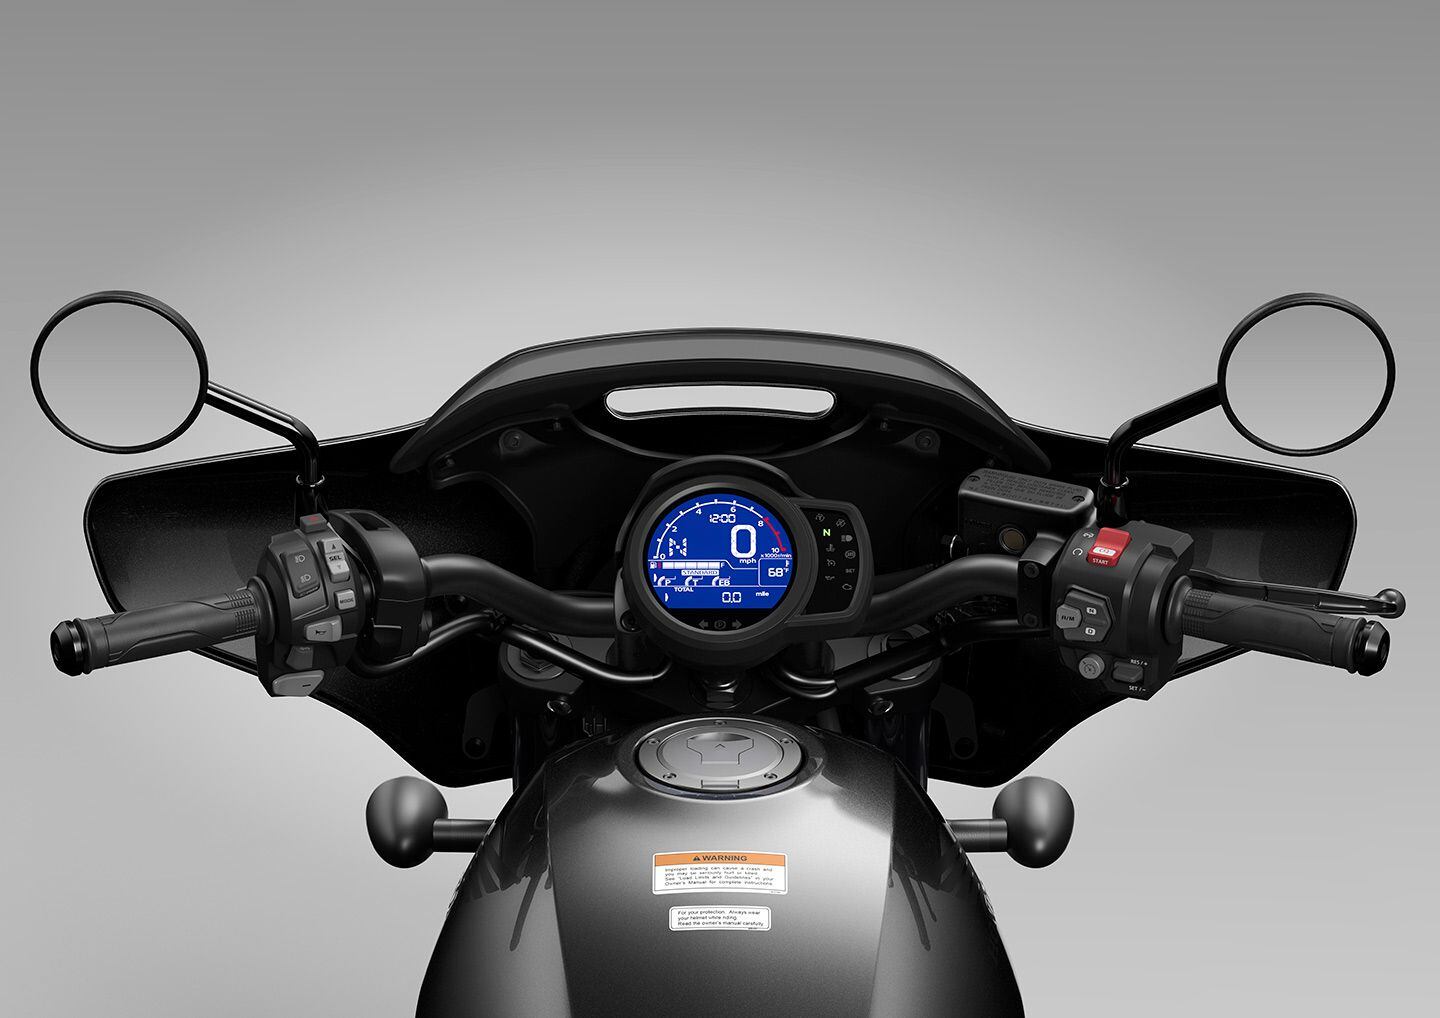 The Rebel’s simple LCD dash is basic but straight-forward to use, allowing riders quick adjustment of various settings. Note: cruise control and the left bar-mounted paddle shifters.